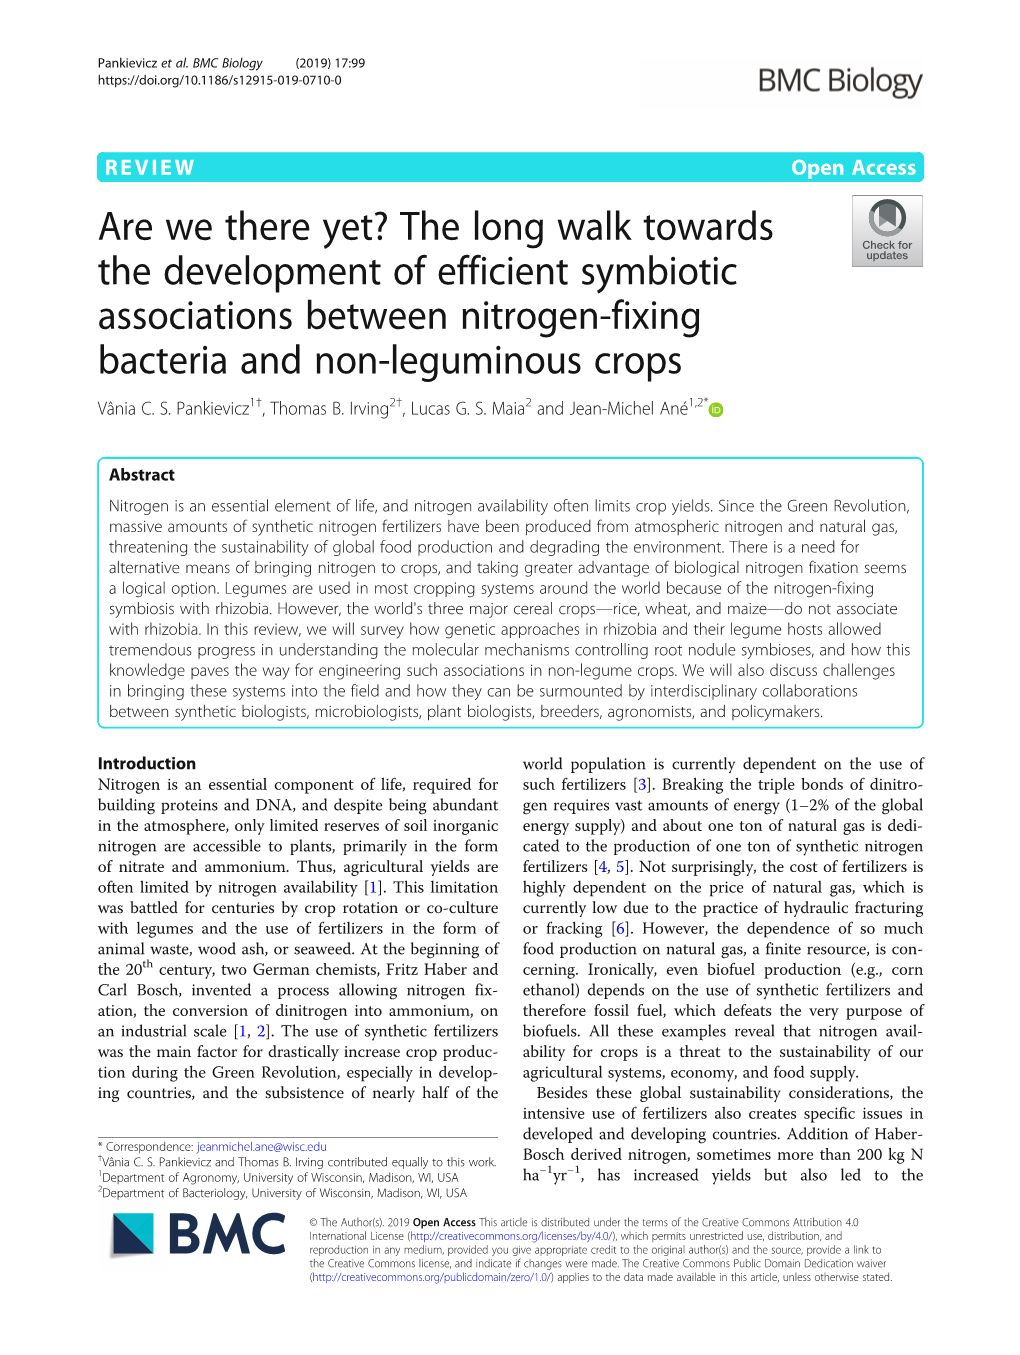 Are We There Yet? the Long Walk Towards the Development of Efficient Symbiotic Associations Between Nitrogen-Fixing Bacteria and Non-Leguminous Crops Vânia C